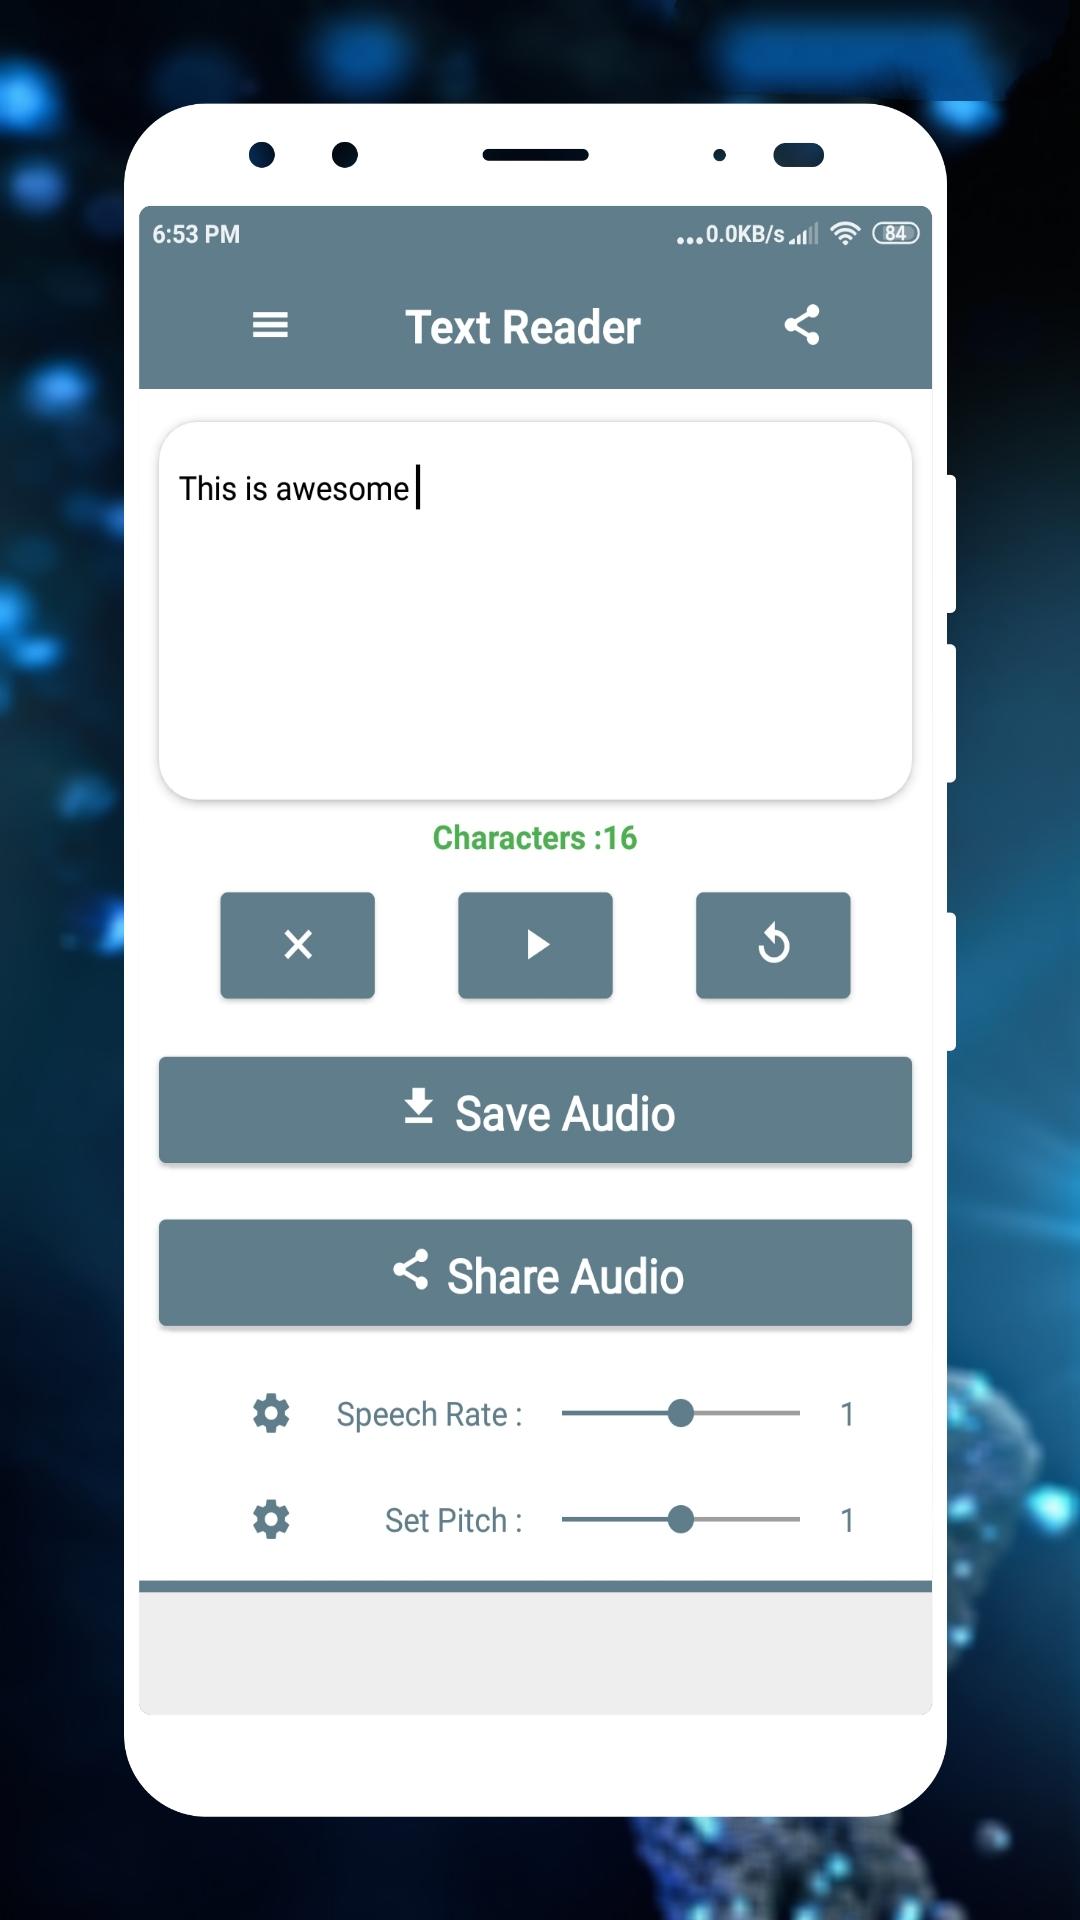 English Text Reader (Text to MP3 converter) for Android - APK Download